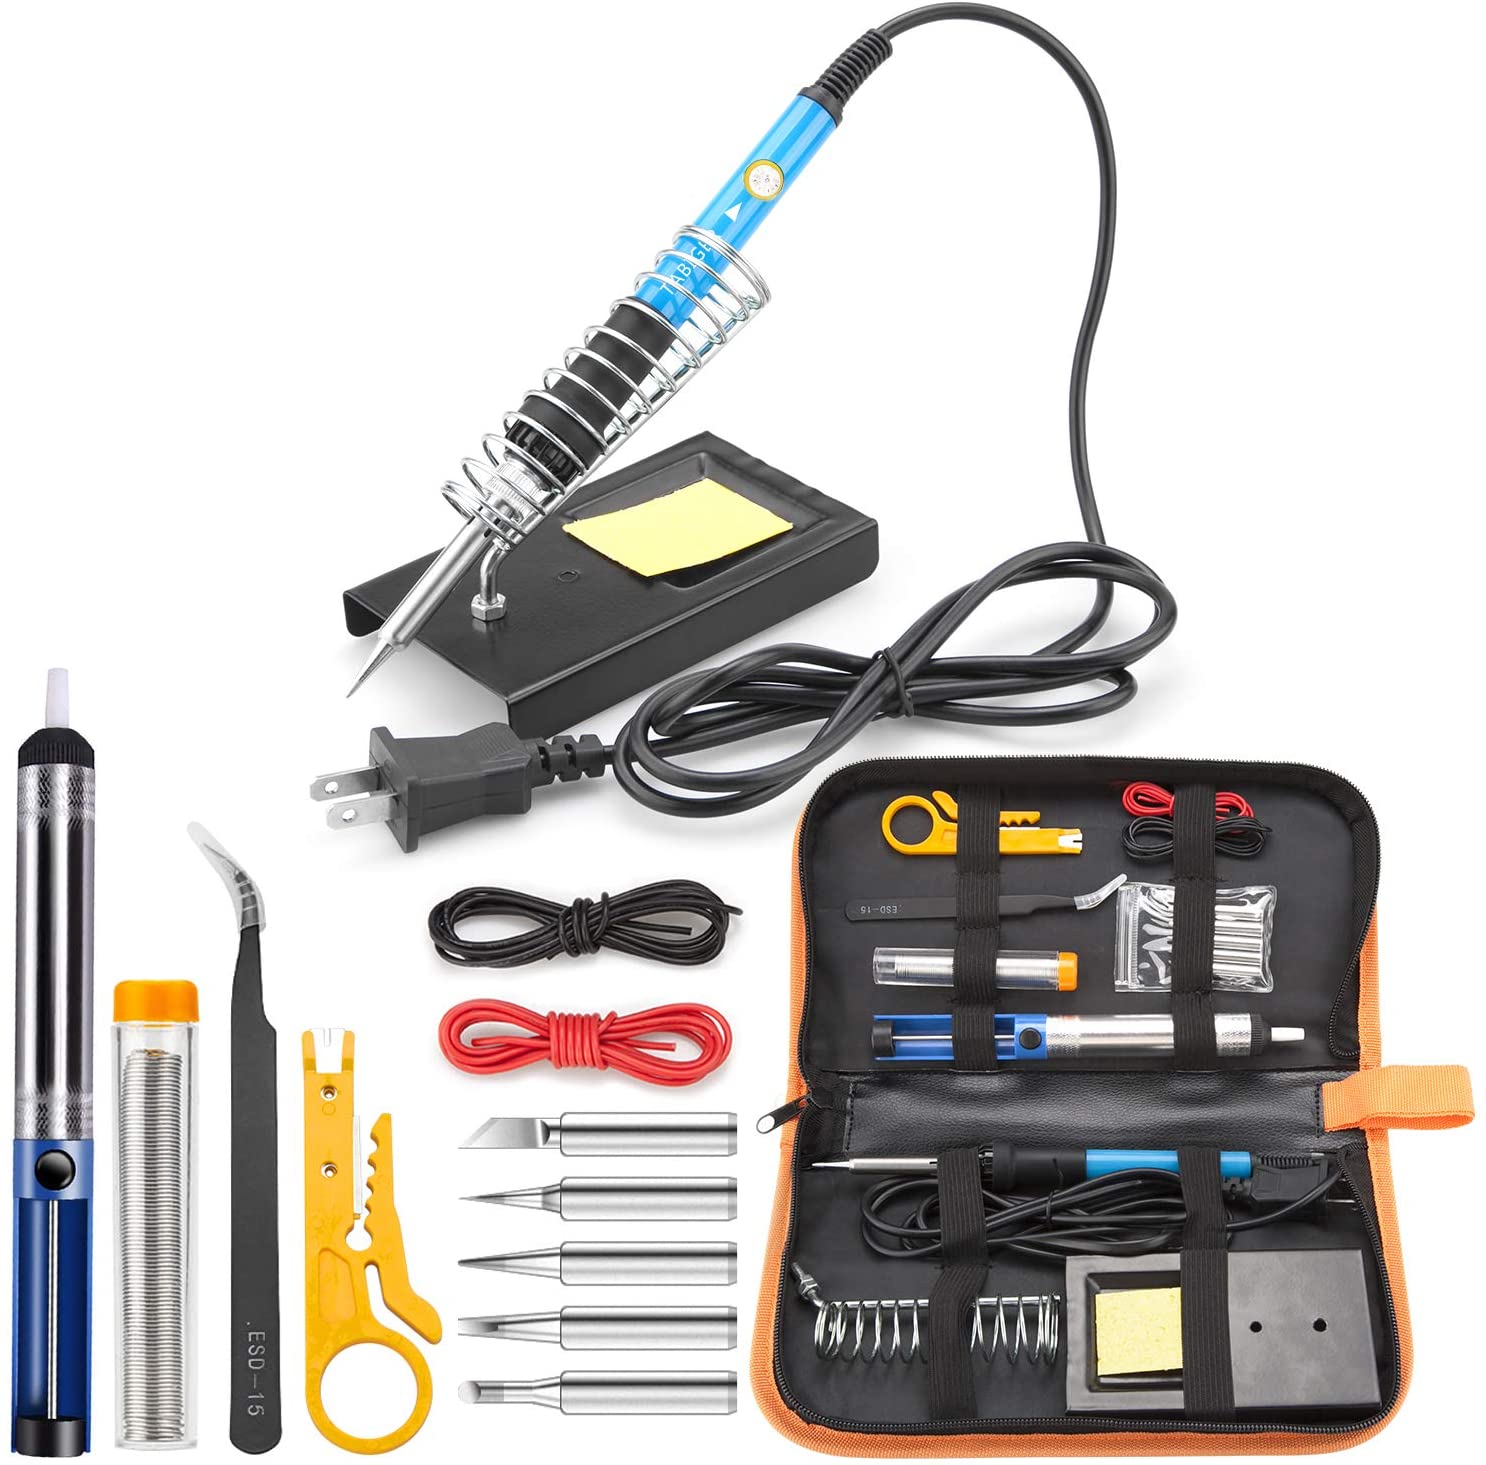 Tabiger Soldering Iron Kit 15-in-1, 60W Soldering Iron with Adjustable Temperature, Soldering Gun, 5pcs Soldering Iron Tips, Solder Wire, Desoldering Pump, Tweezer, Soldering Stand, Tool Case